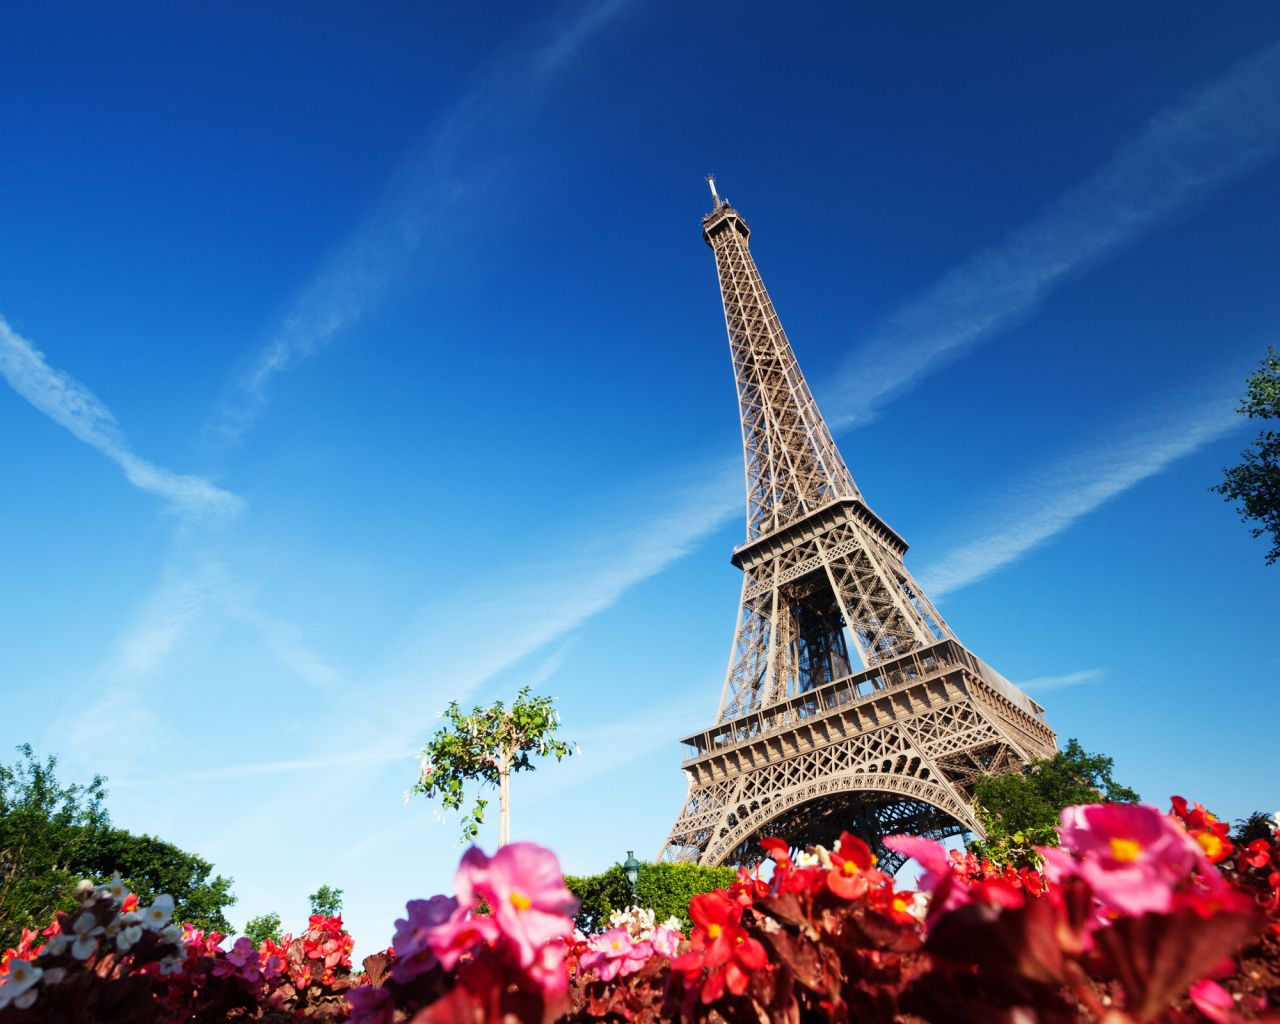 Flowers and Eiffel Tower